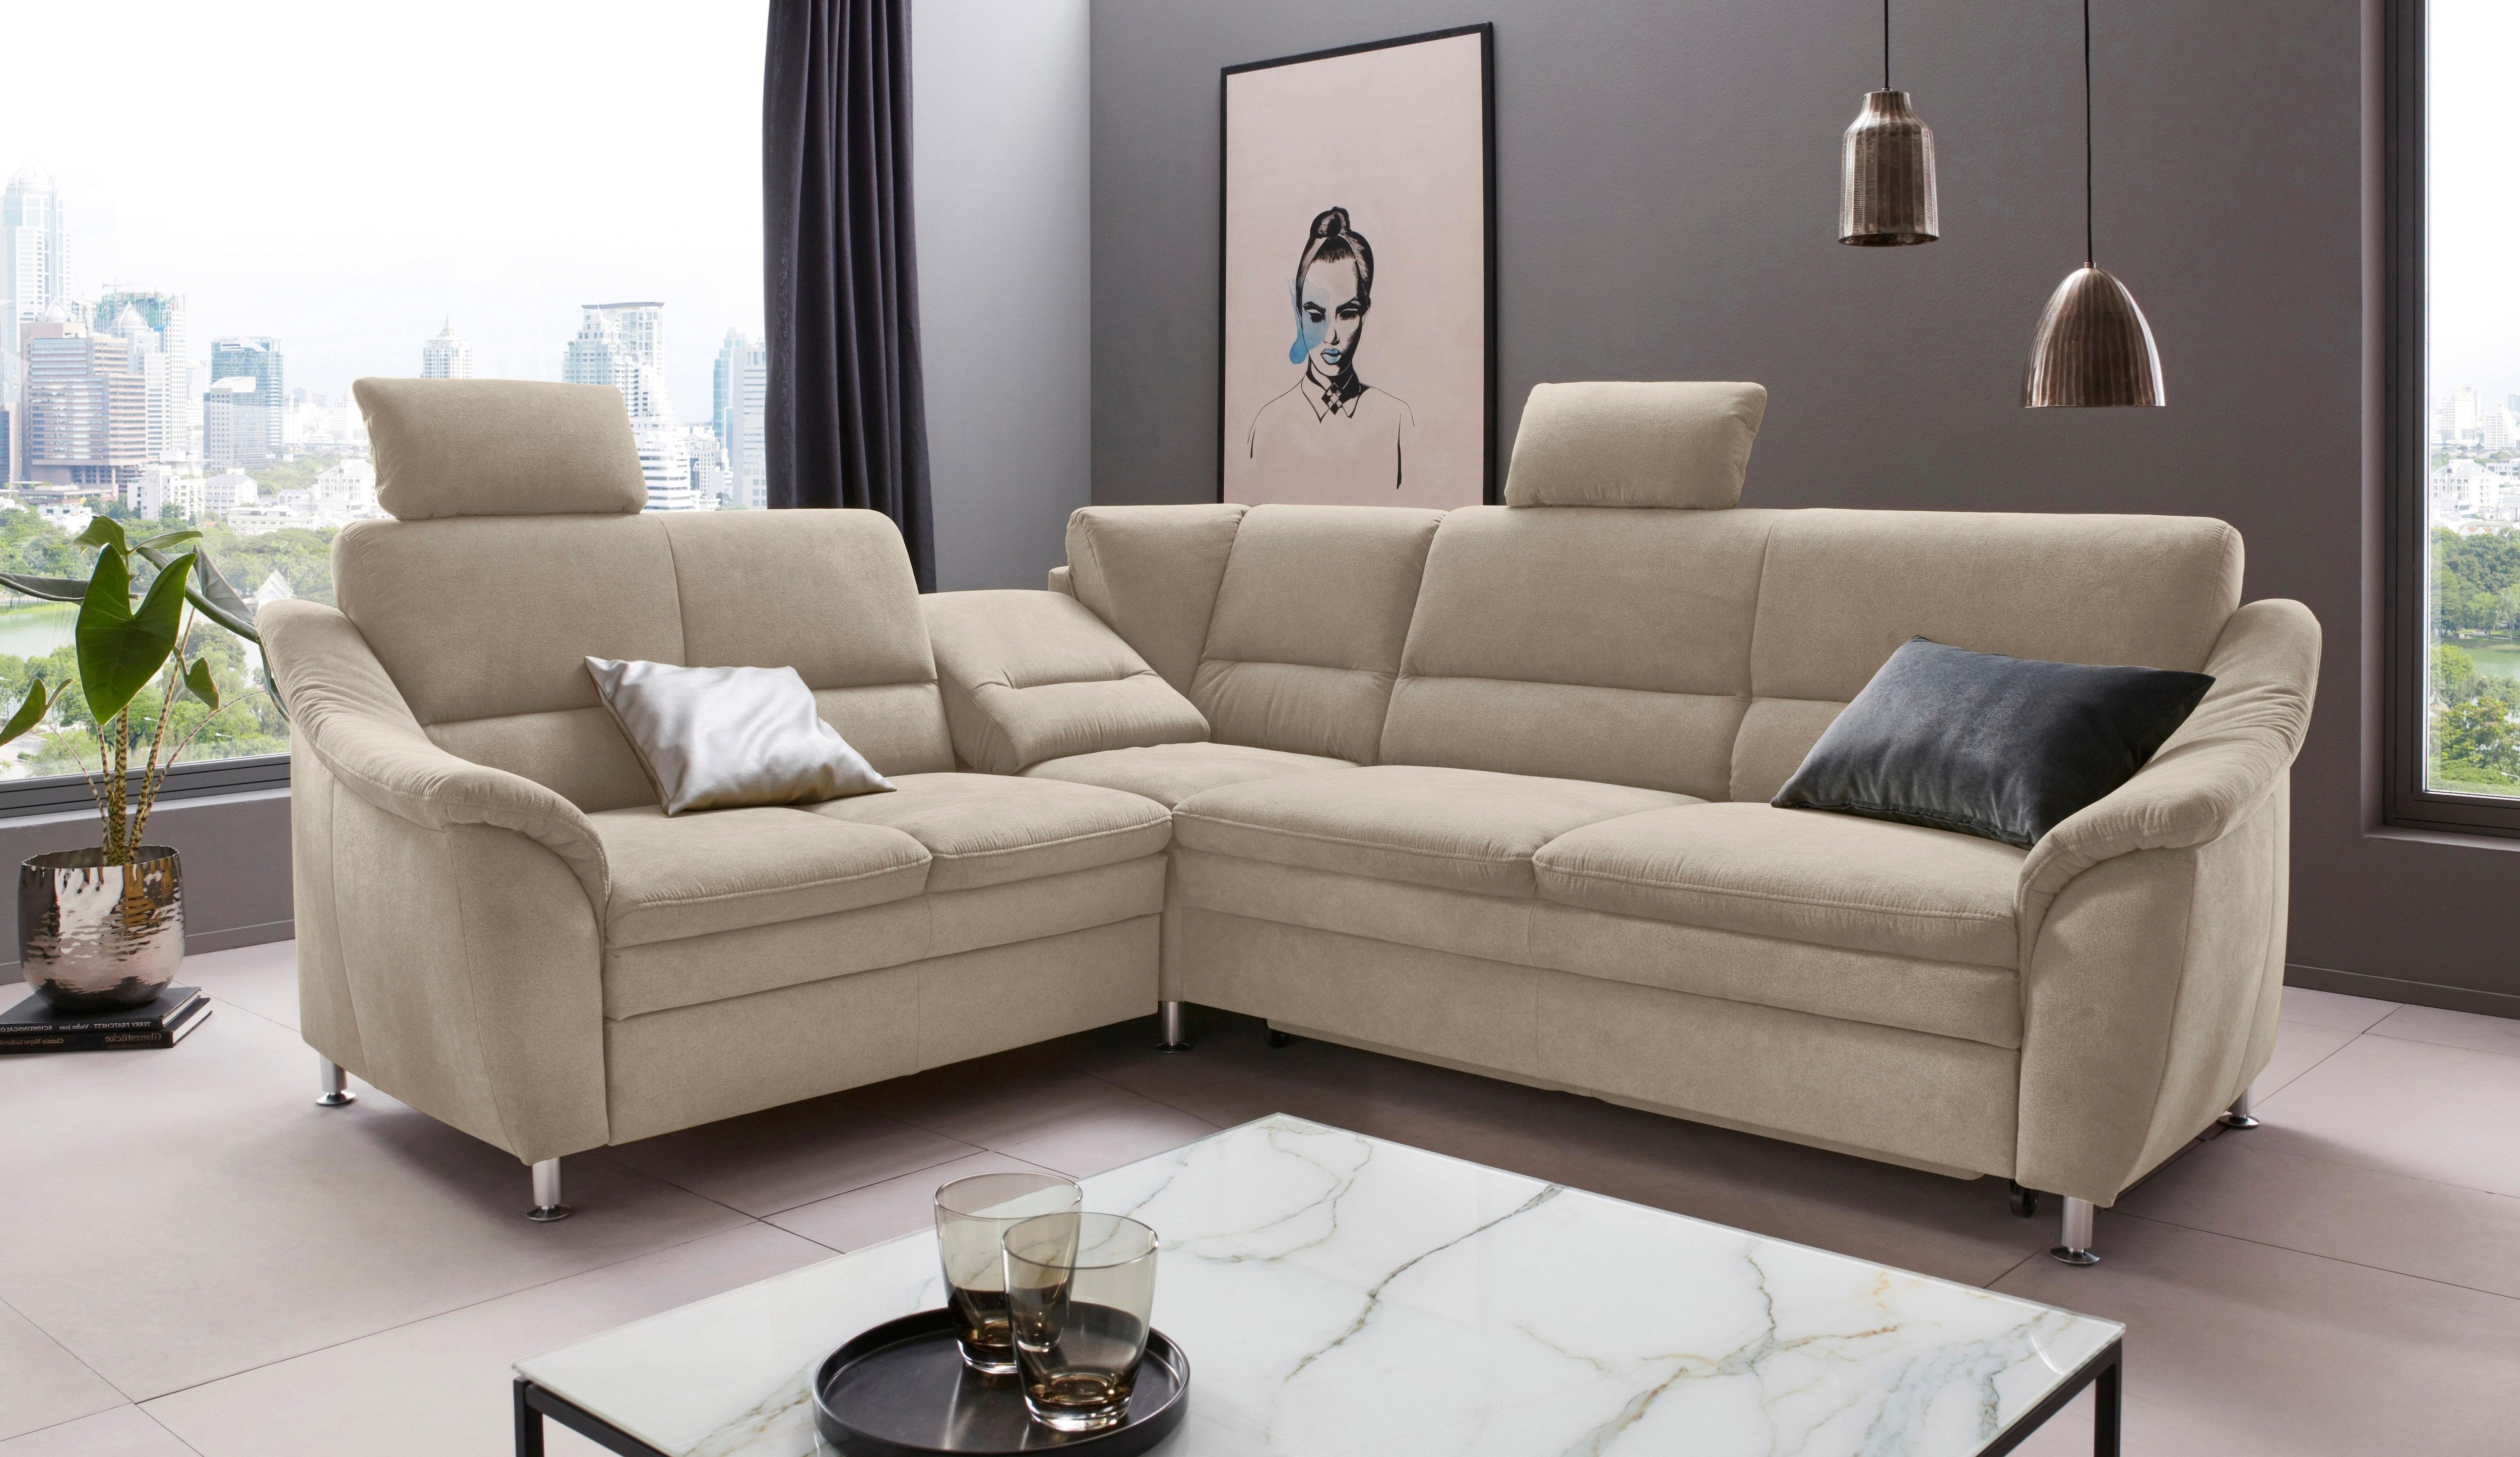 Places of Style Ecksofa »Cardoso« PLACES OF STYLE beige